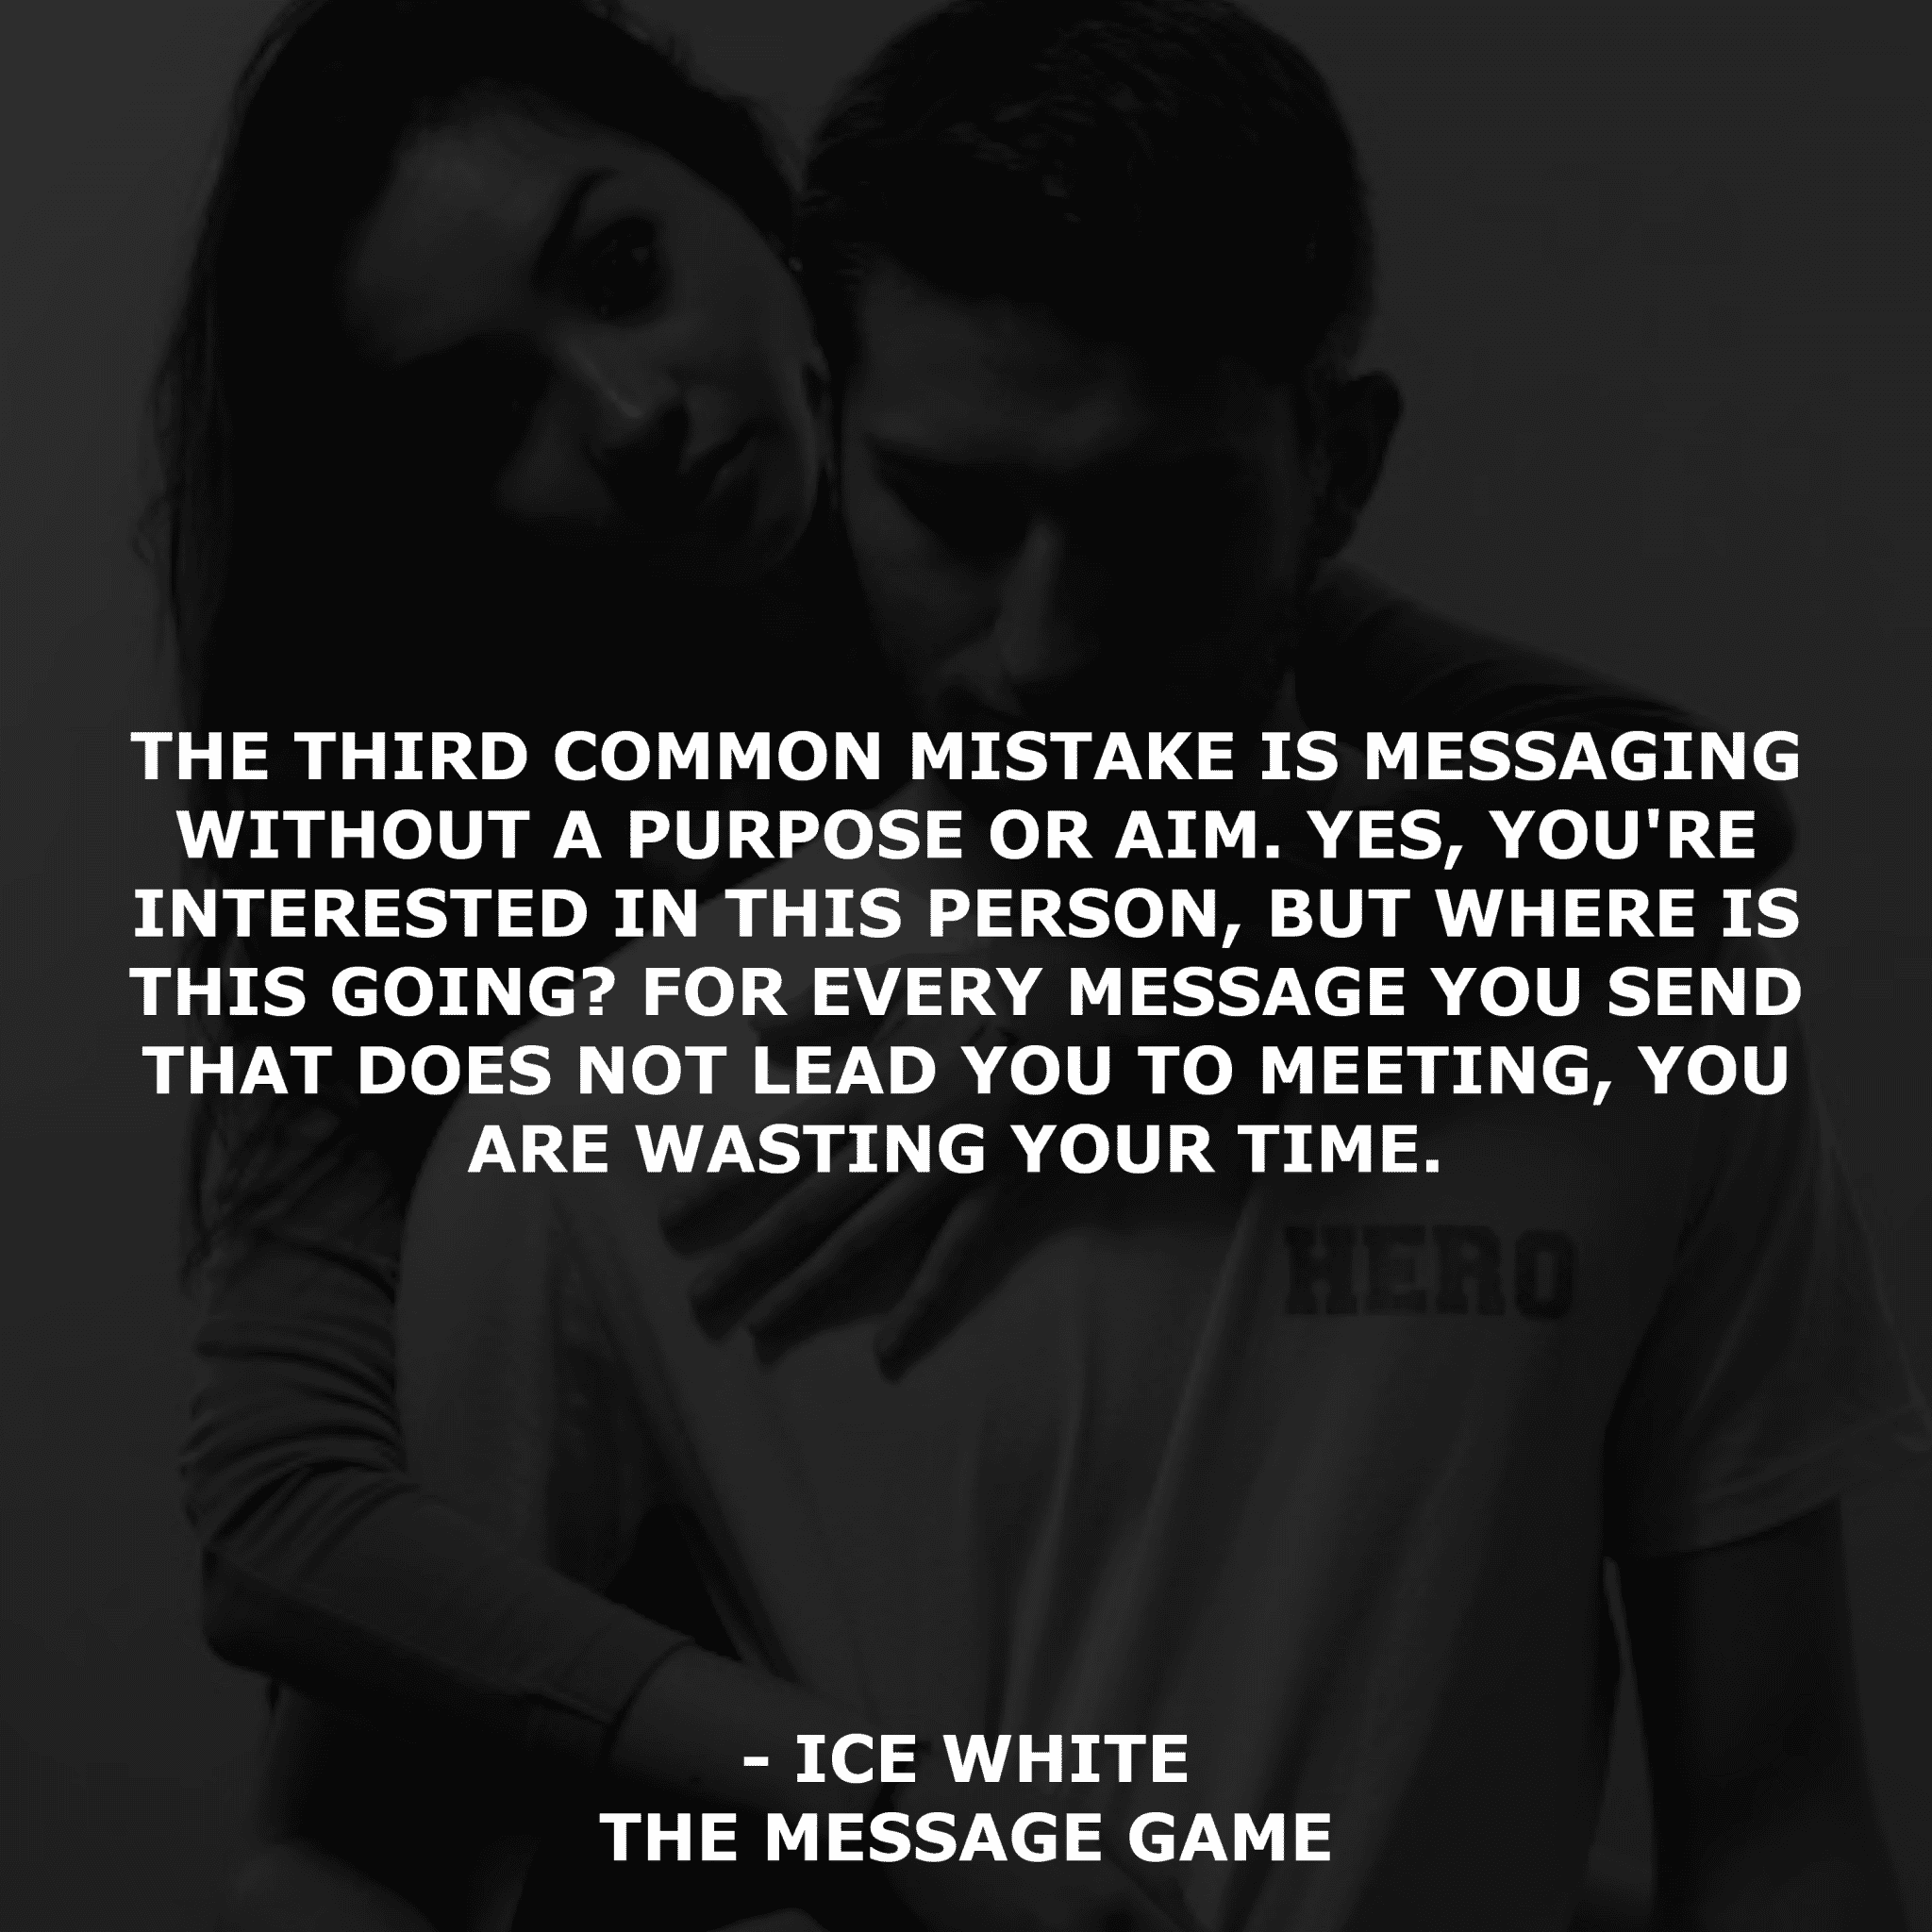 Online dating waste of time book quotes The third common mistake is messaging without a purpose or aim. Yes, you're interested in this person, but where is this going? For every message you send that does not lead you to meeting, you are wasting your time